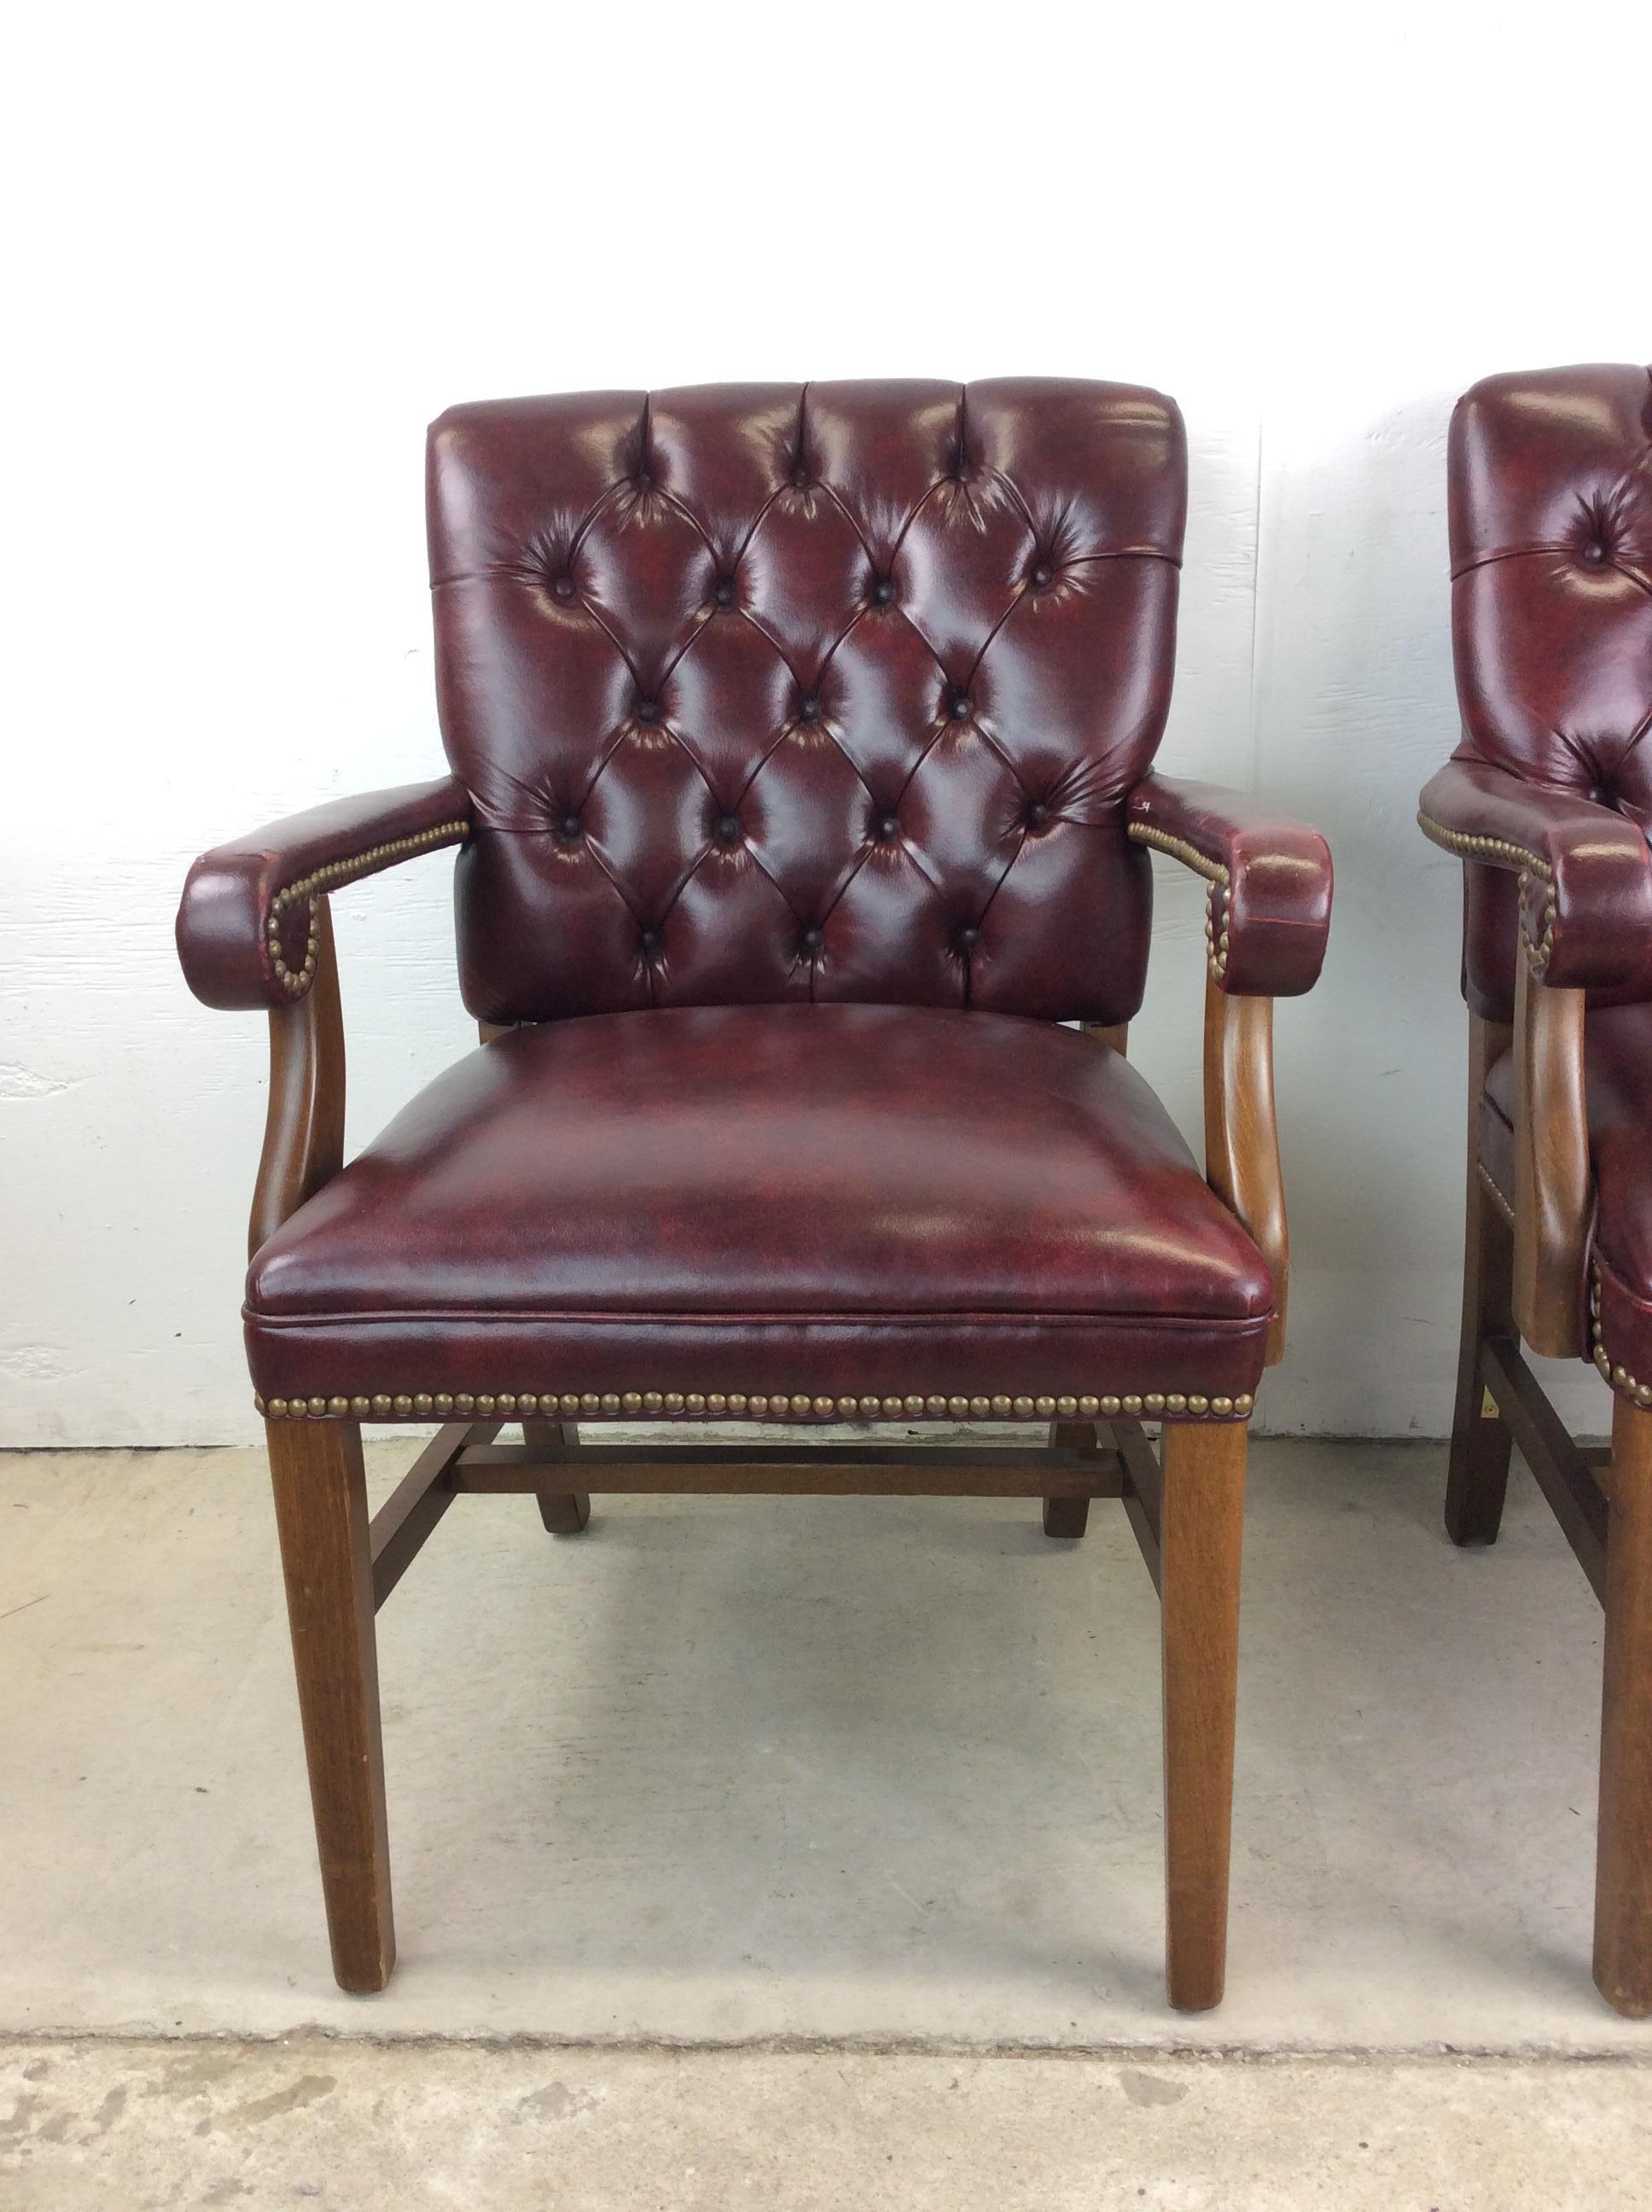 American Classical Pair of Vintage Red Tufted Leather Arm Chairs For Sale